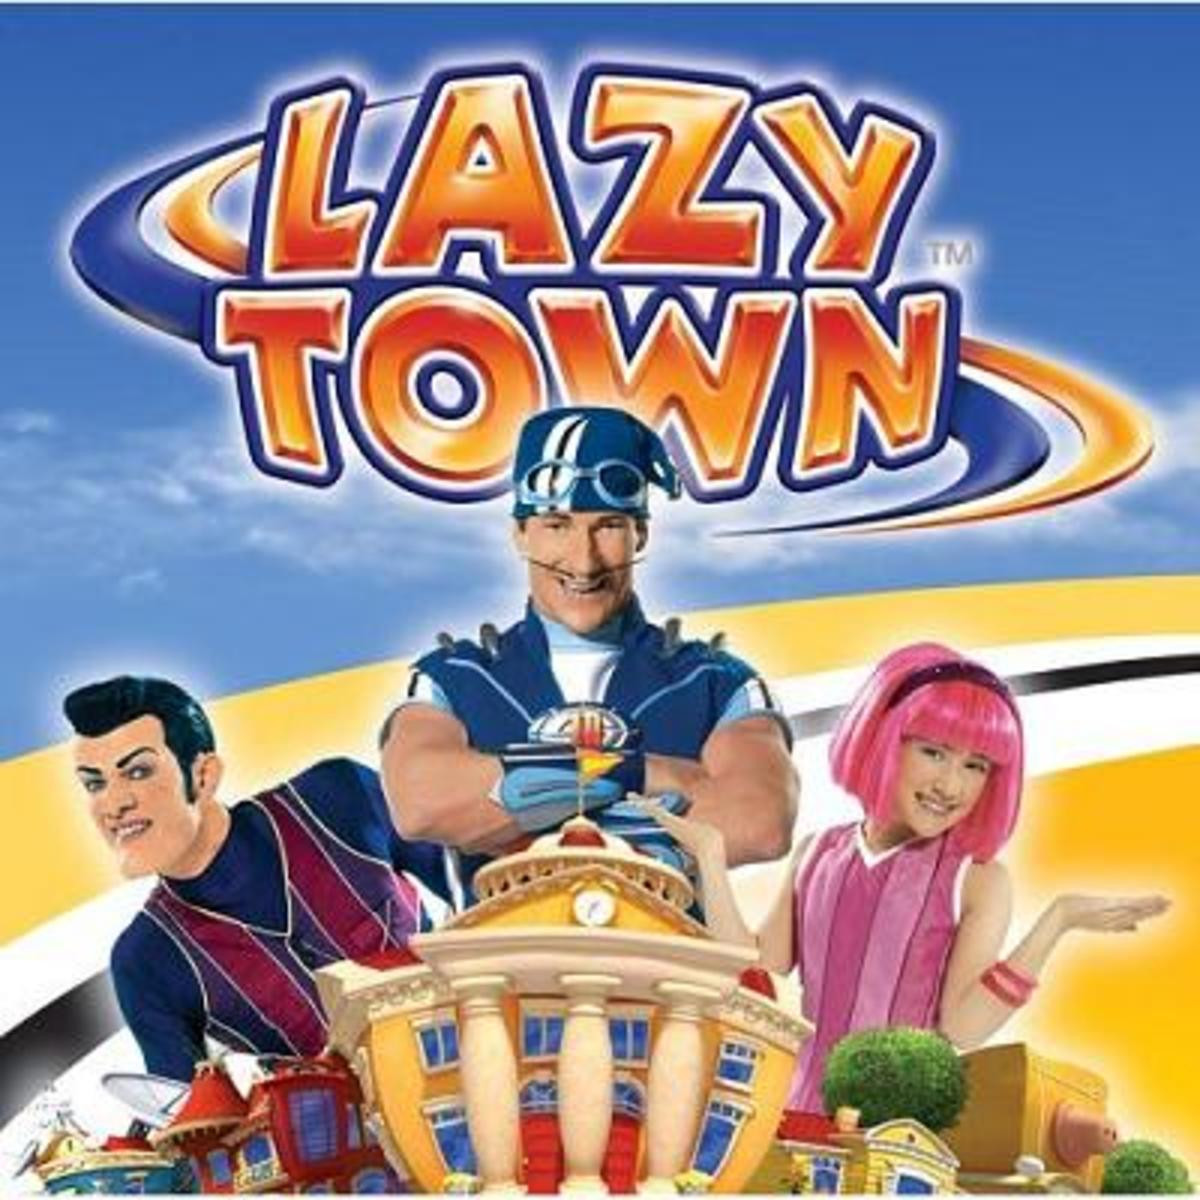 Kids Show Girl With Pink Hair
 Sprout Adds Lazytown Multichannel